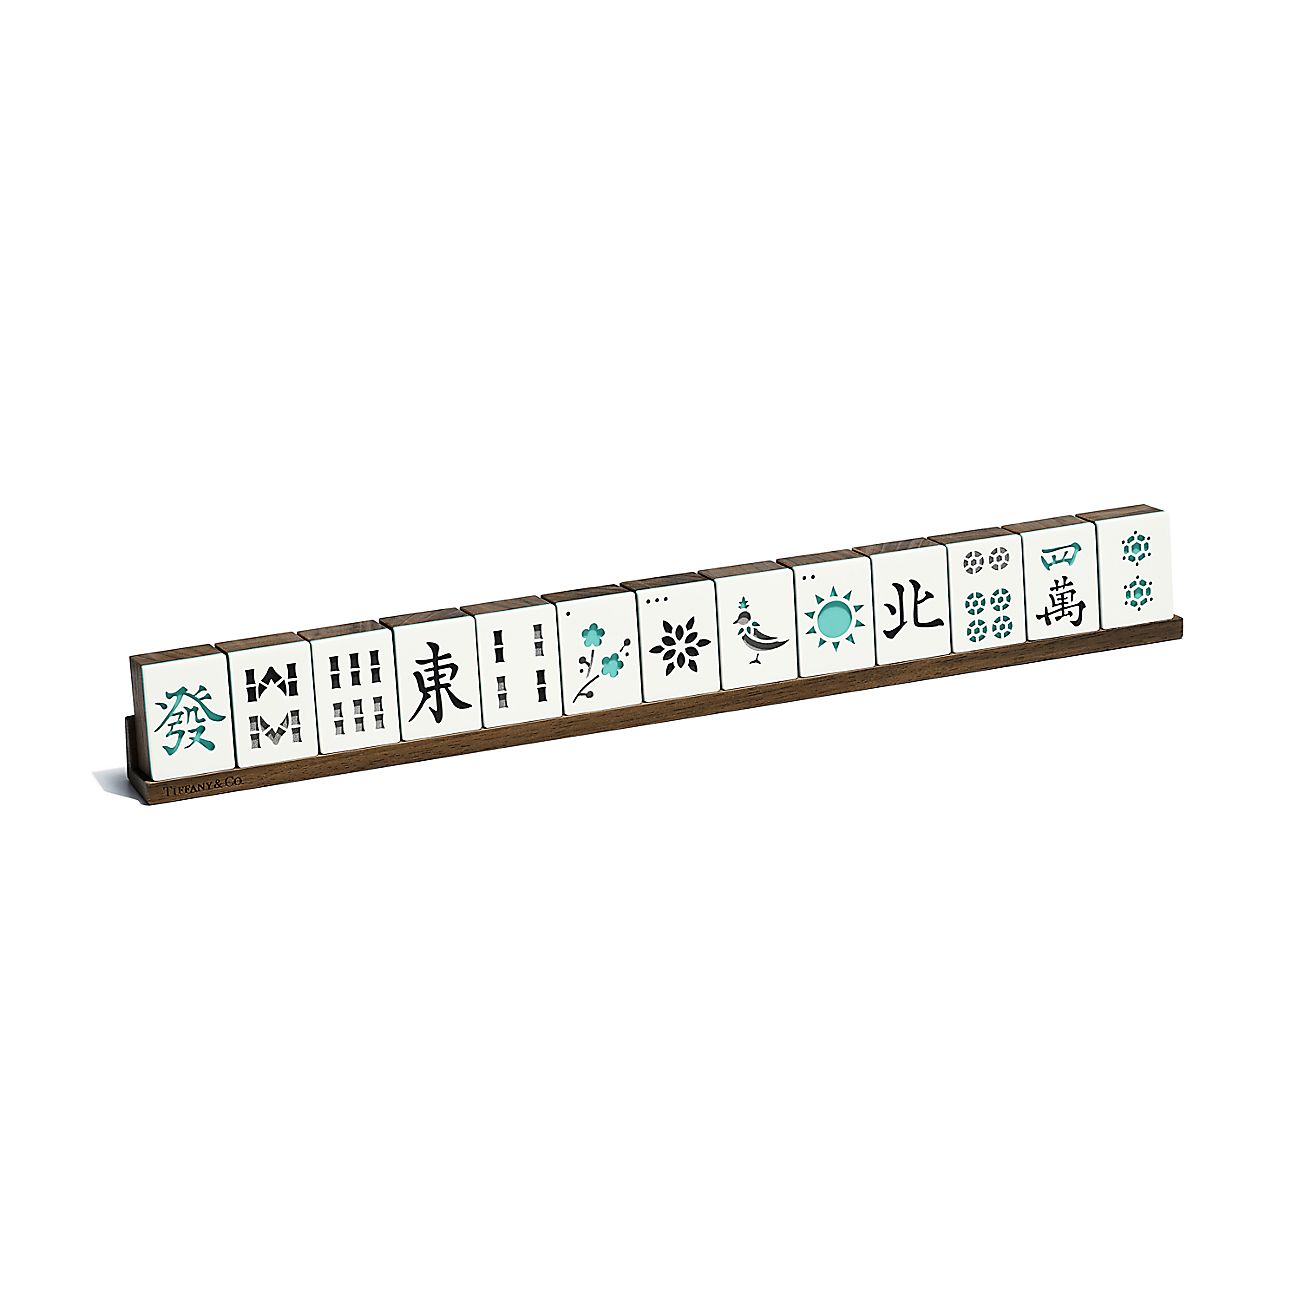 Everyday Objects mahjong set in a Tiffany Blue® leather box